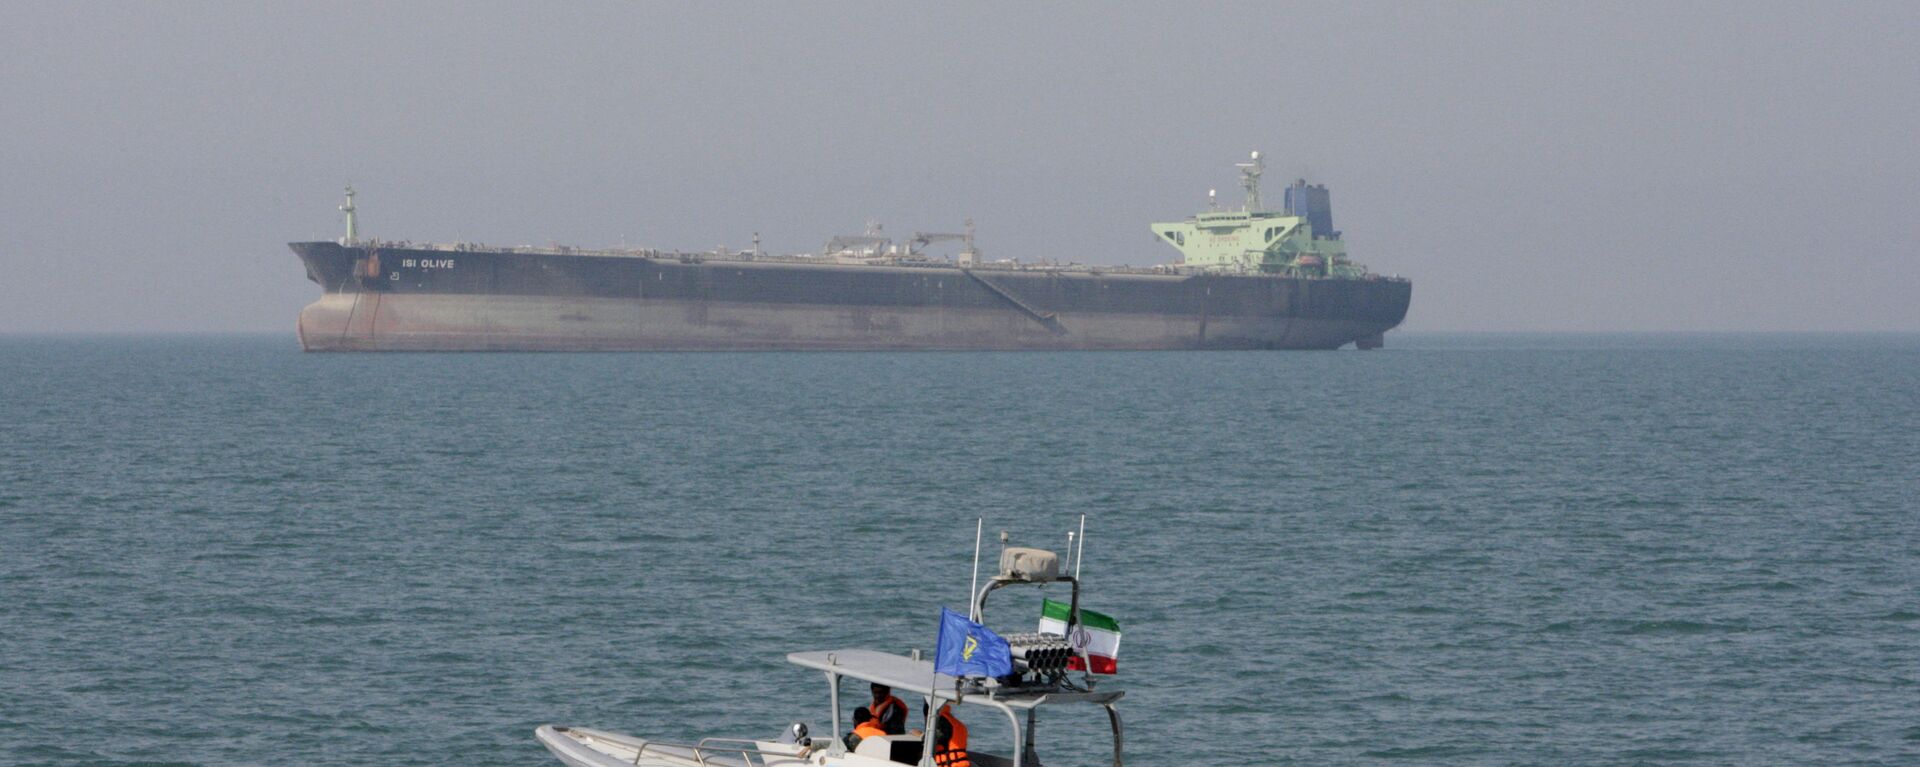 In this July 2, 2012 file photo, an Iranian Revolutionary Guard speedboat moves in the Persian Gulf while an oil tanker is seen in background - Sputnik International, 1920, 11.05.2022